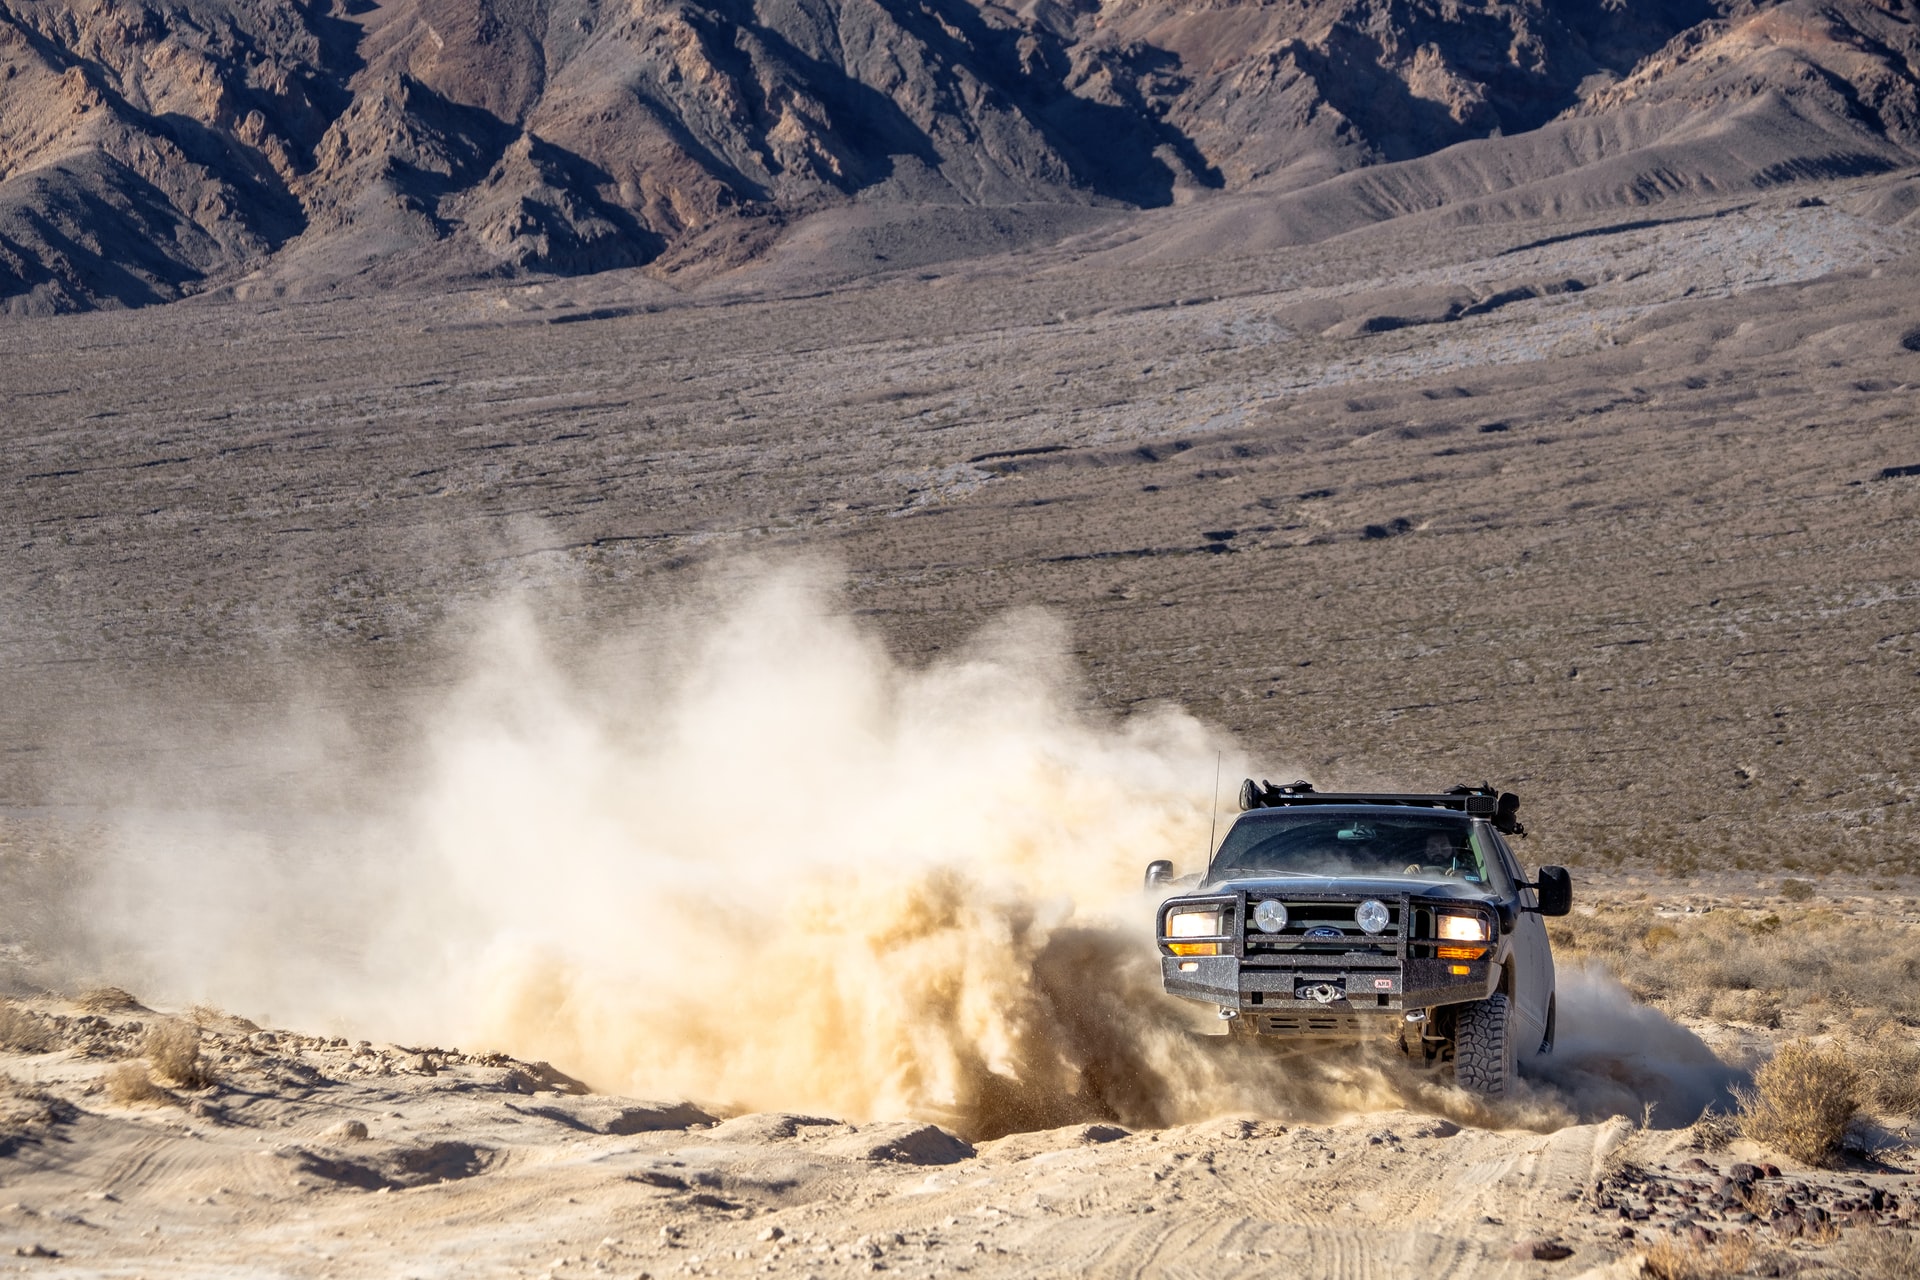 You're likely going to want a truck with more low-end torque.